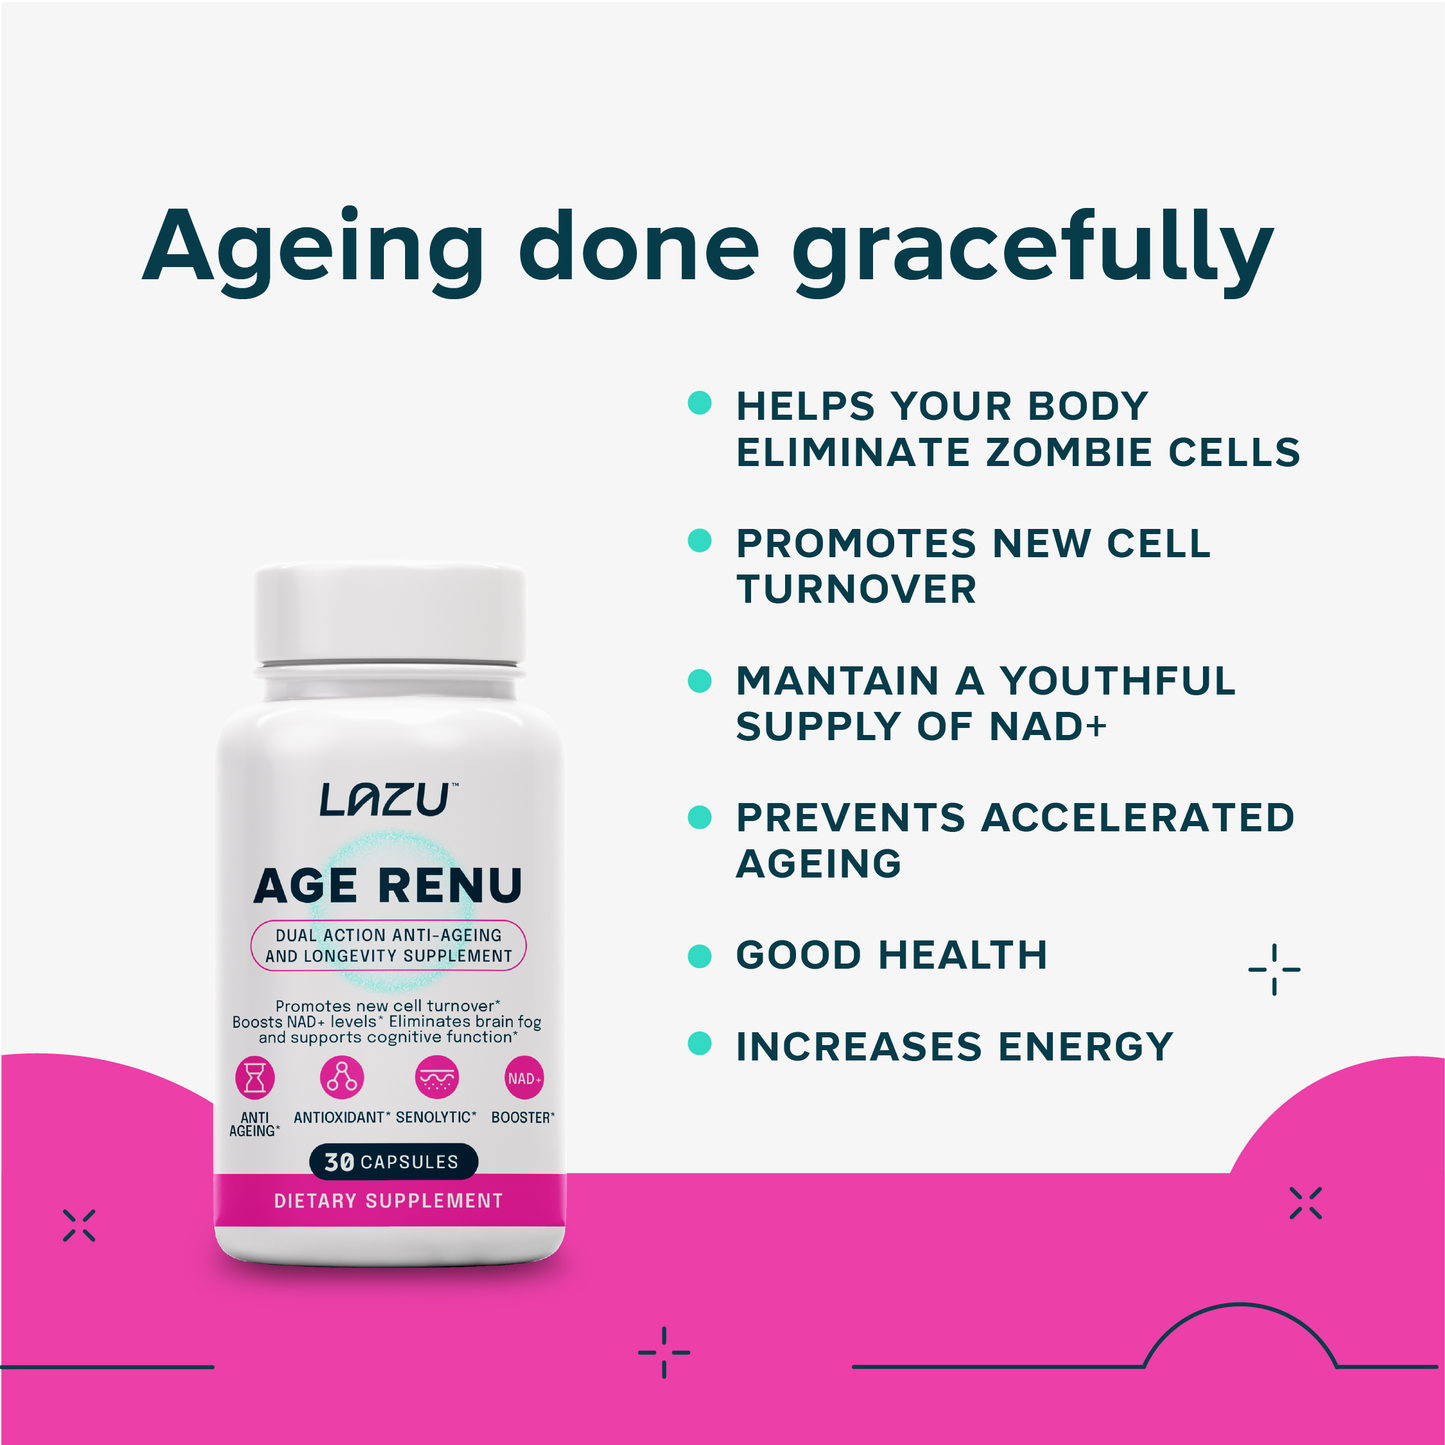 AGE RENU - Dual action Anti-aging and longevity supplement